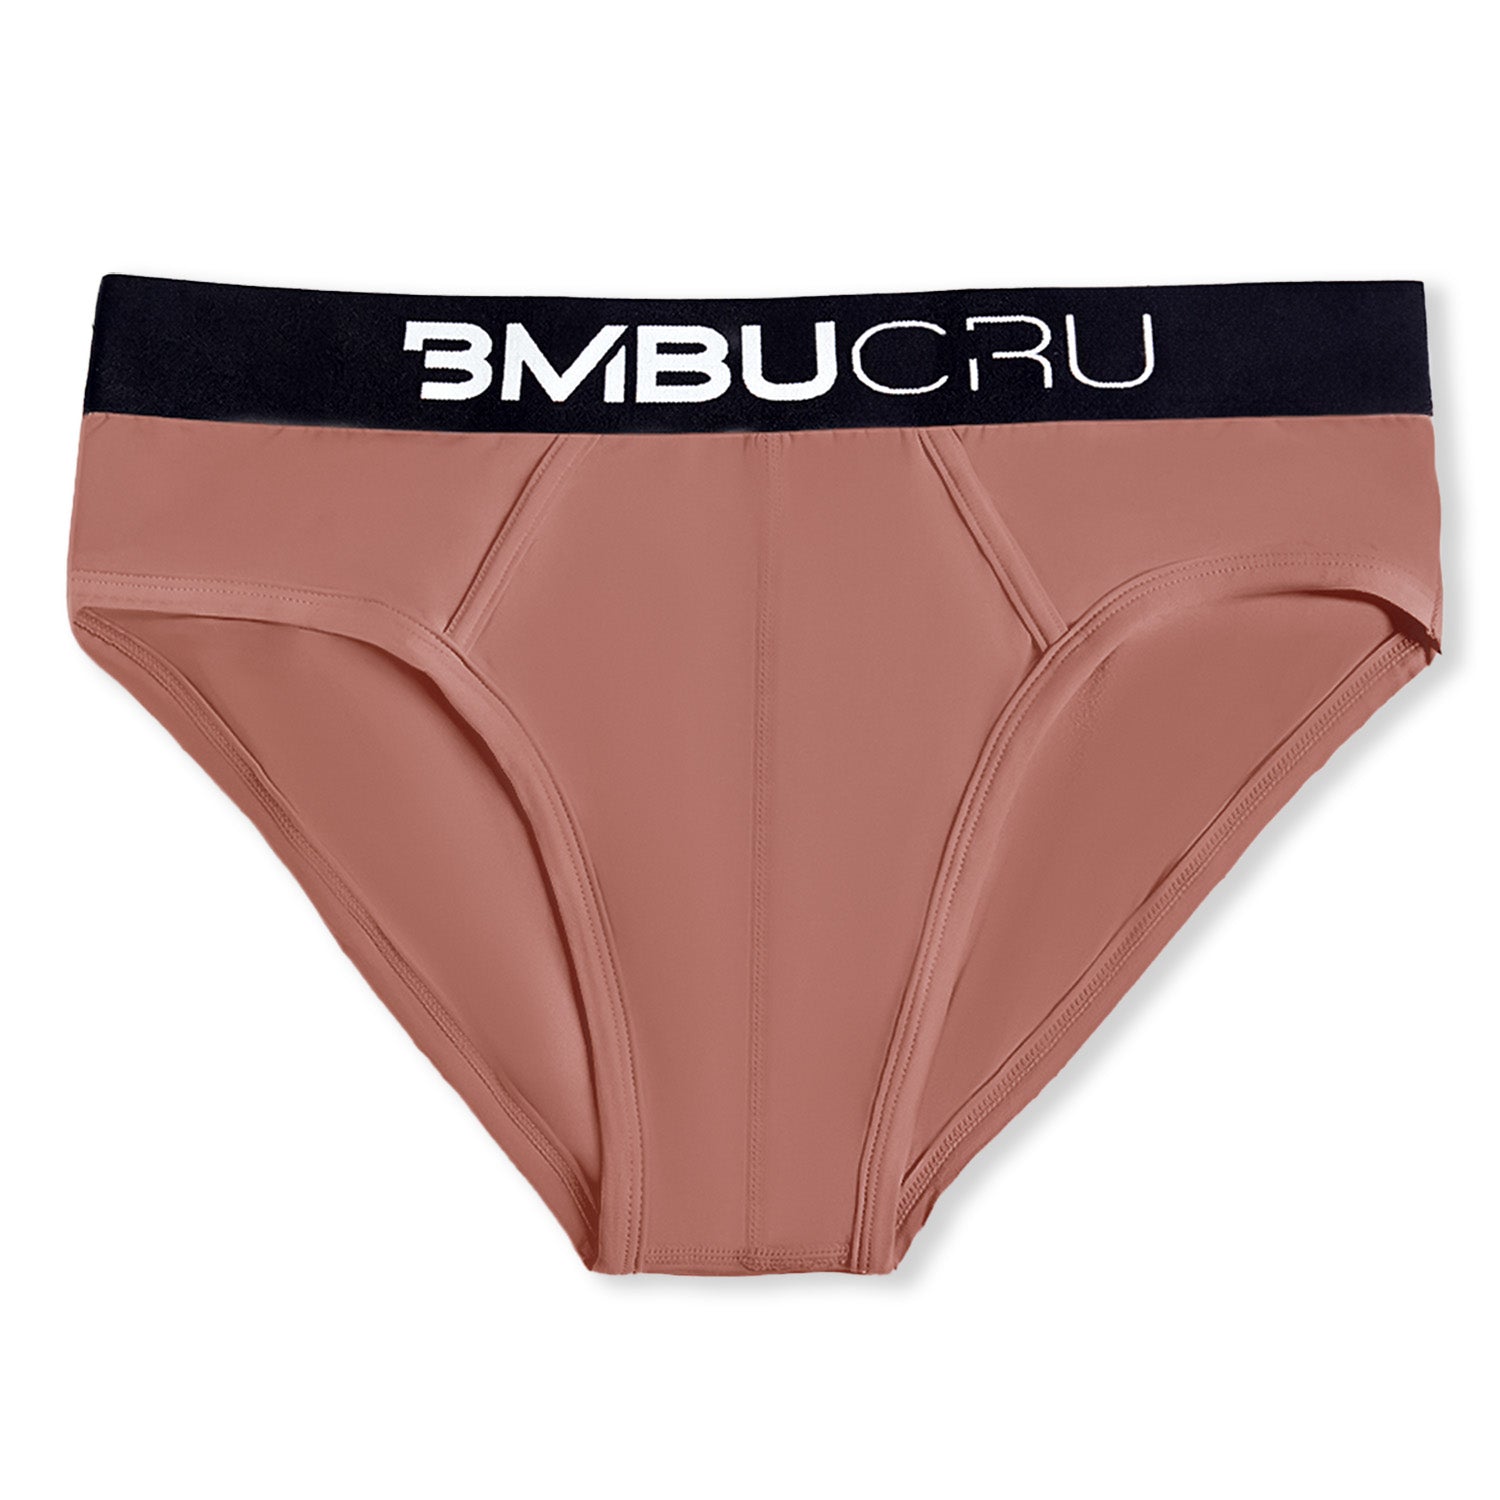 Find EURO REGULAR BRIEF by Khushboo creation near me